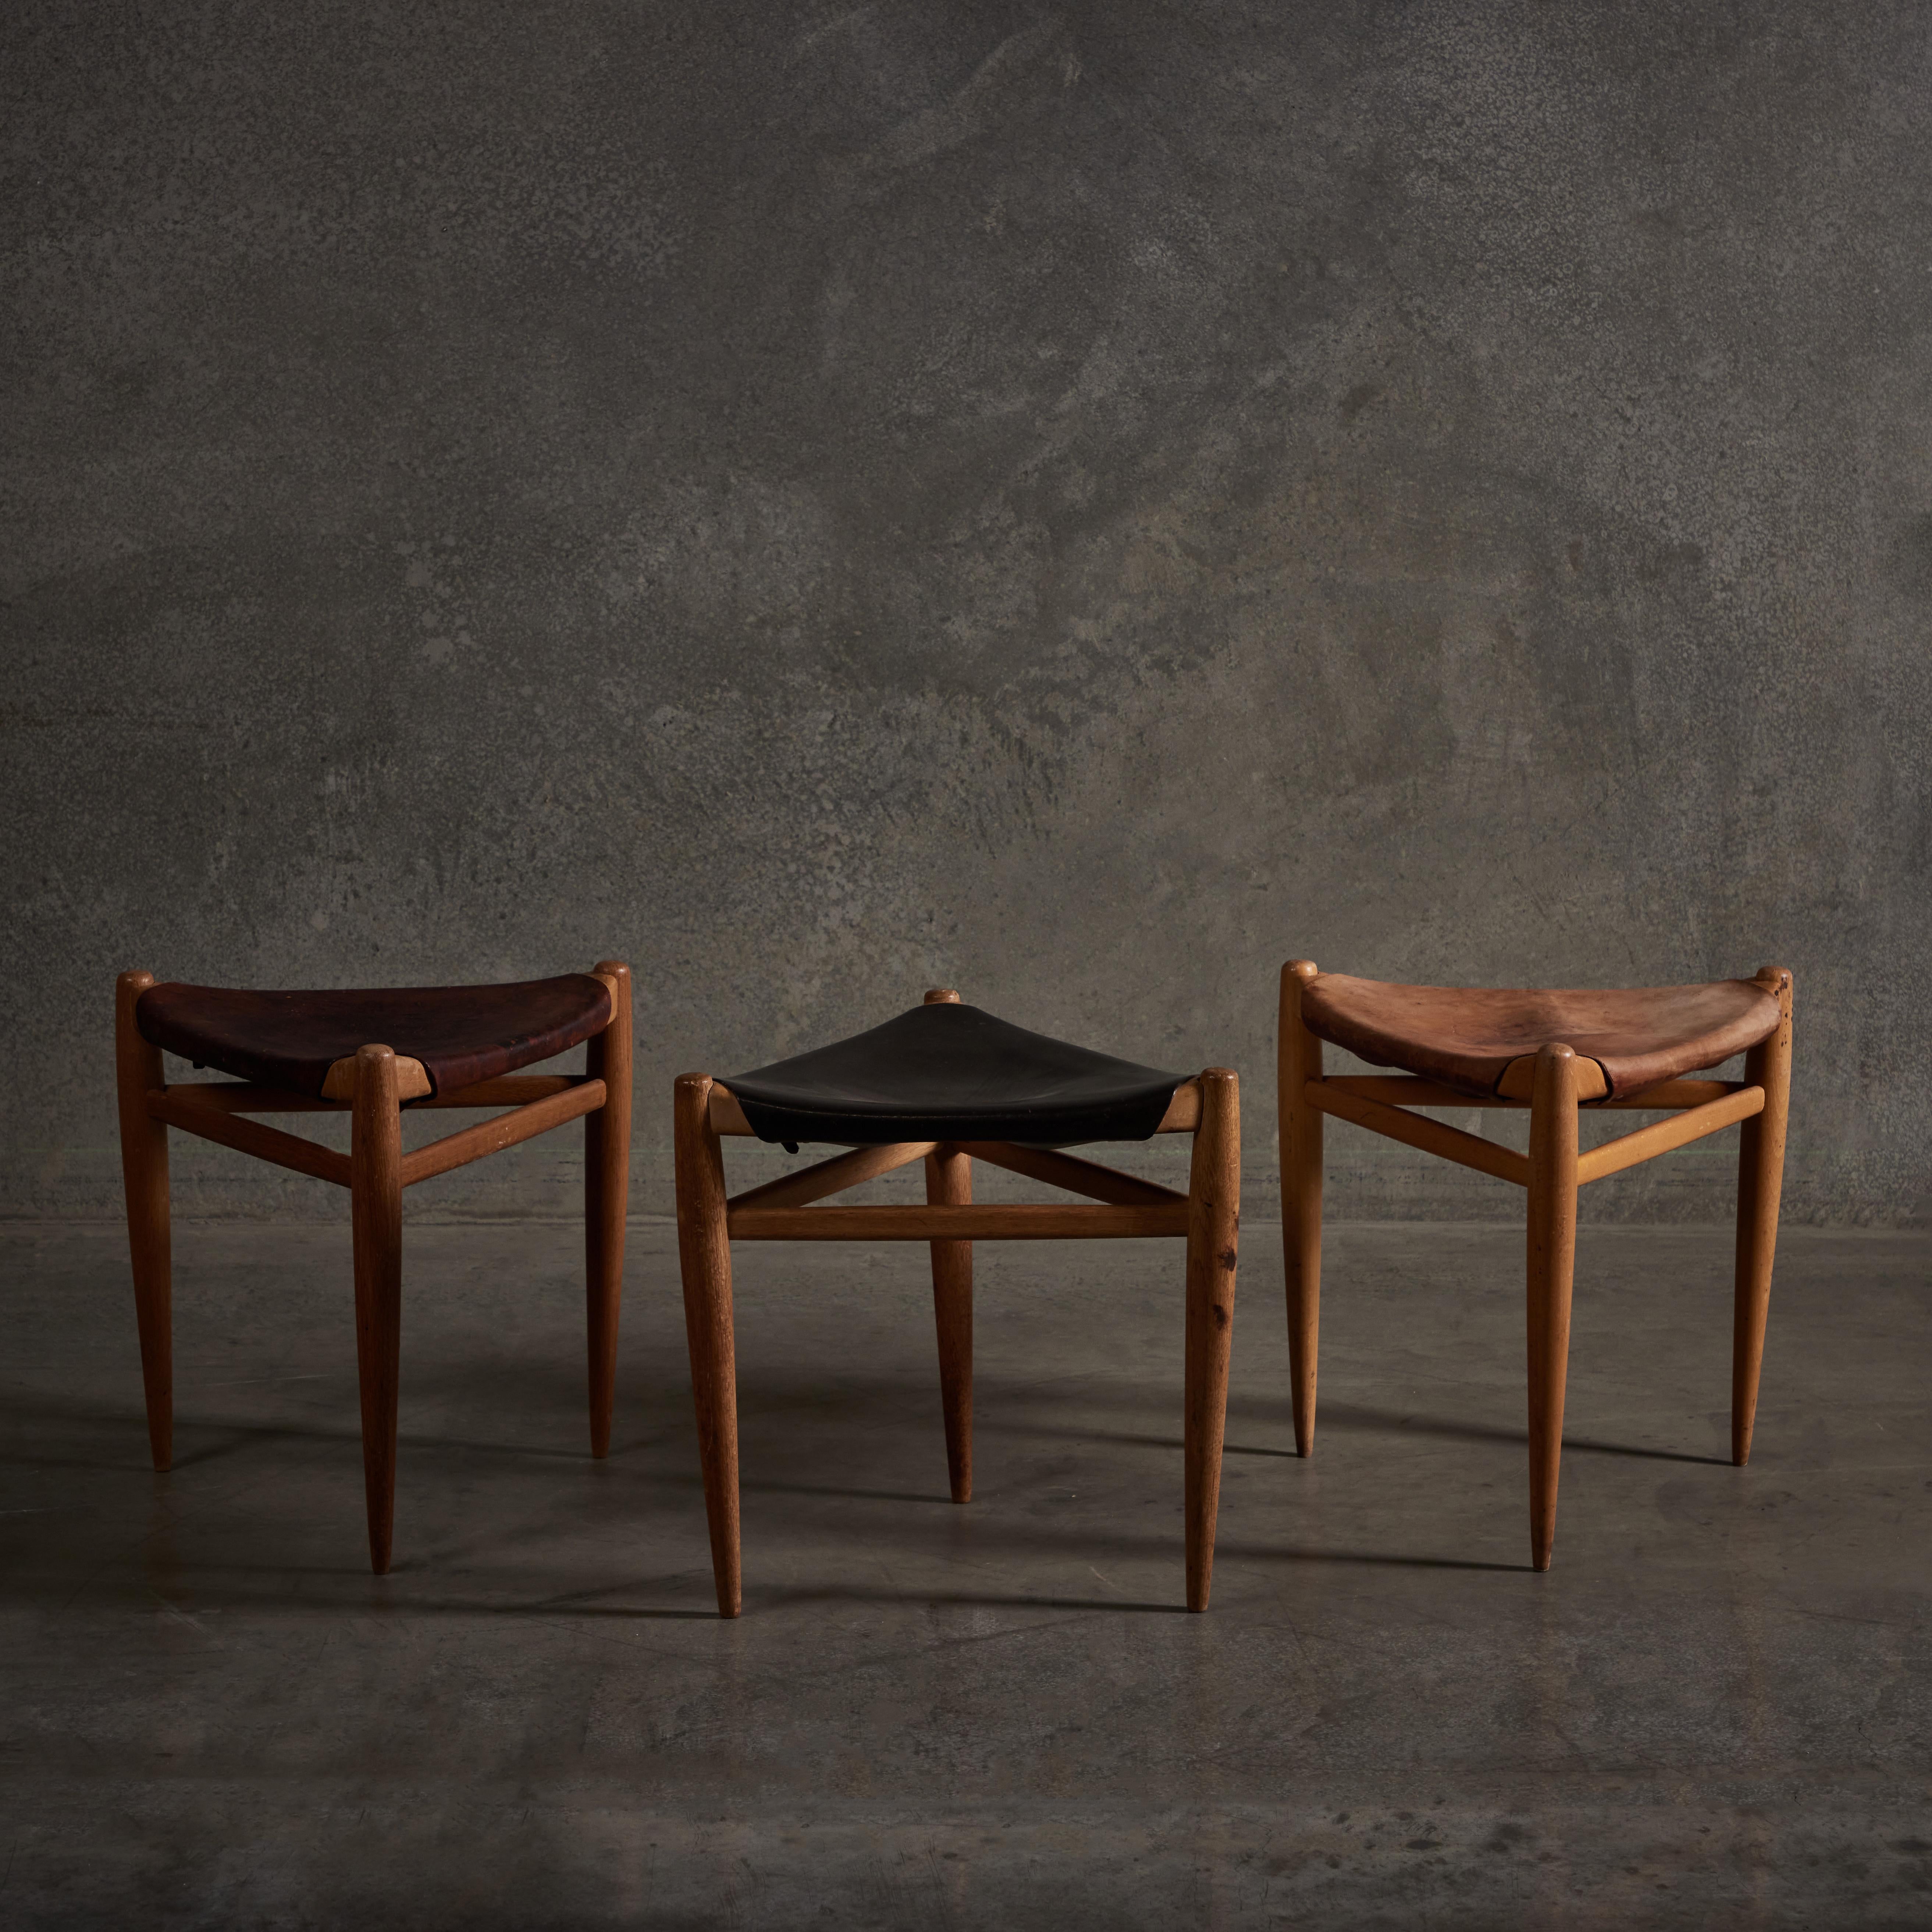 Set of three patinated leather Stools by Uno & Östen Kristiansson for Luxus, Vittsjö. Made in Sweden circa 1960s.